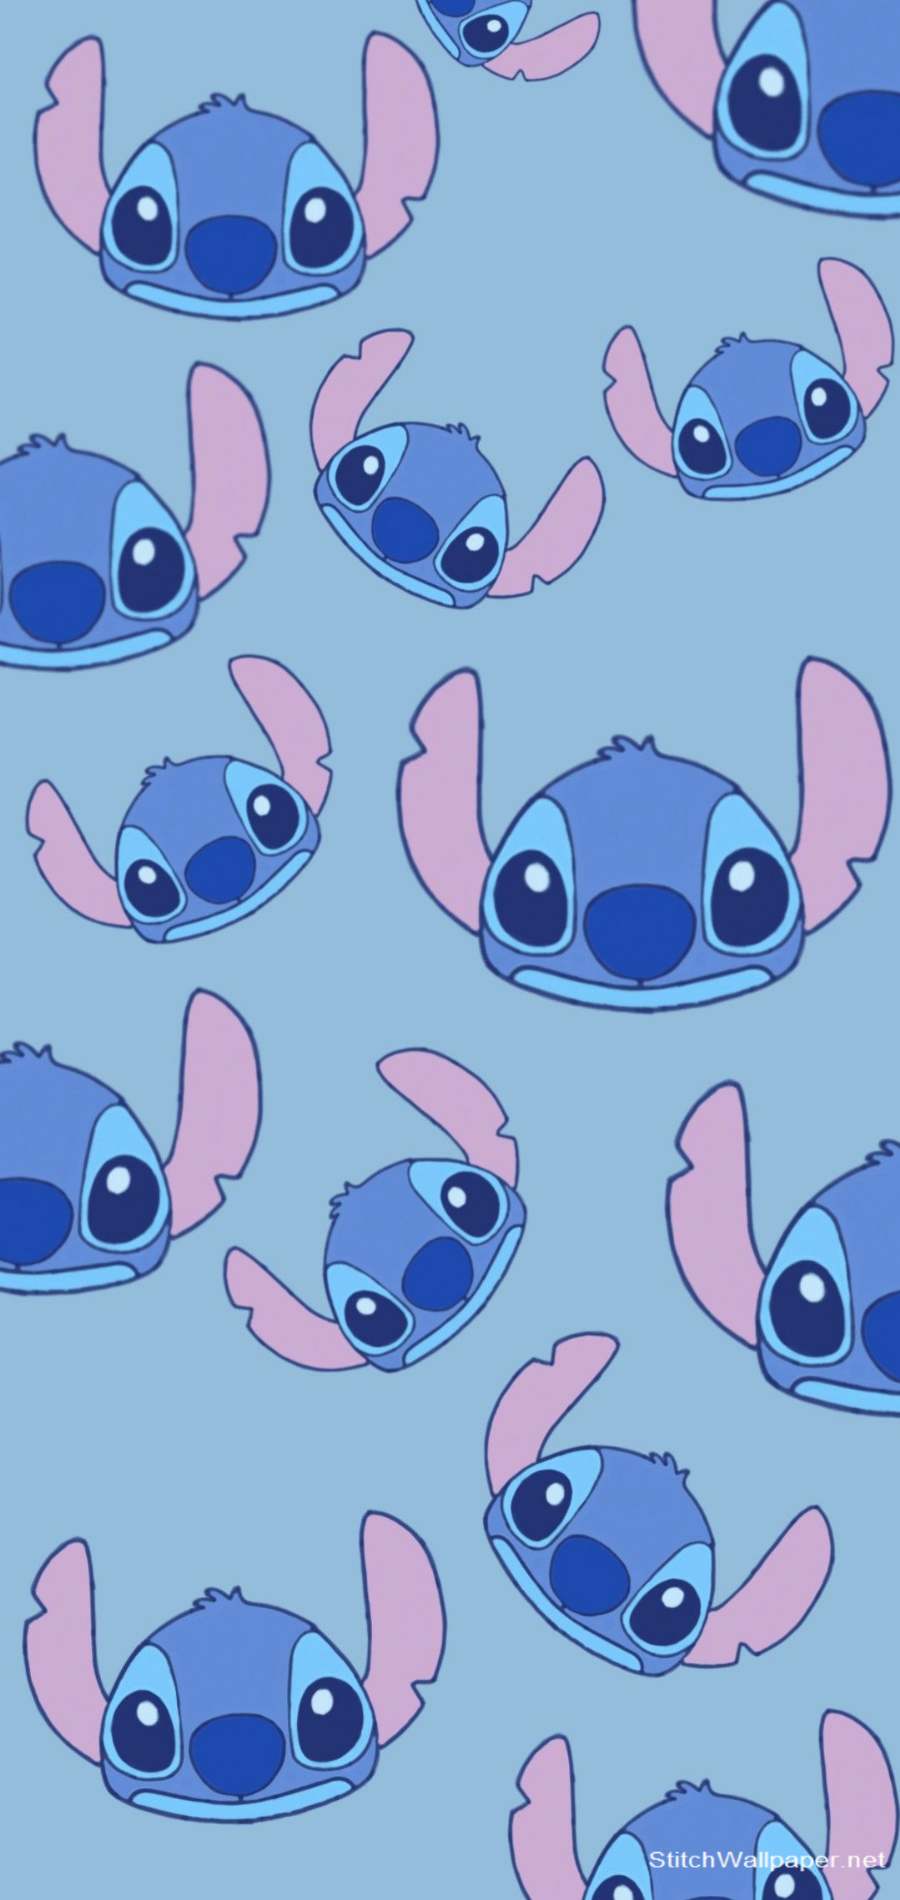 stitch wallpaper for phone